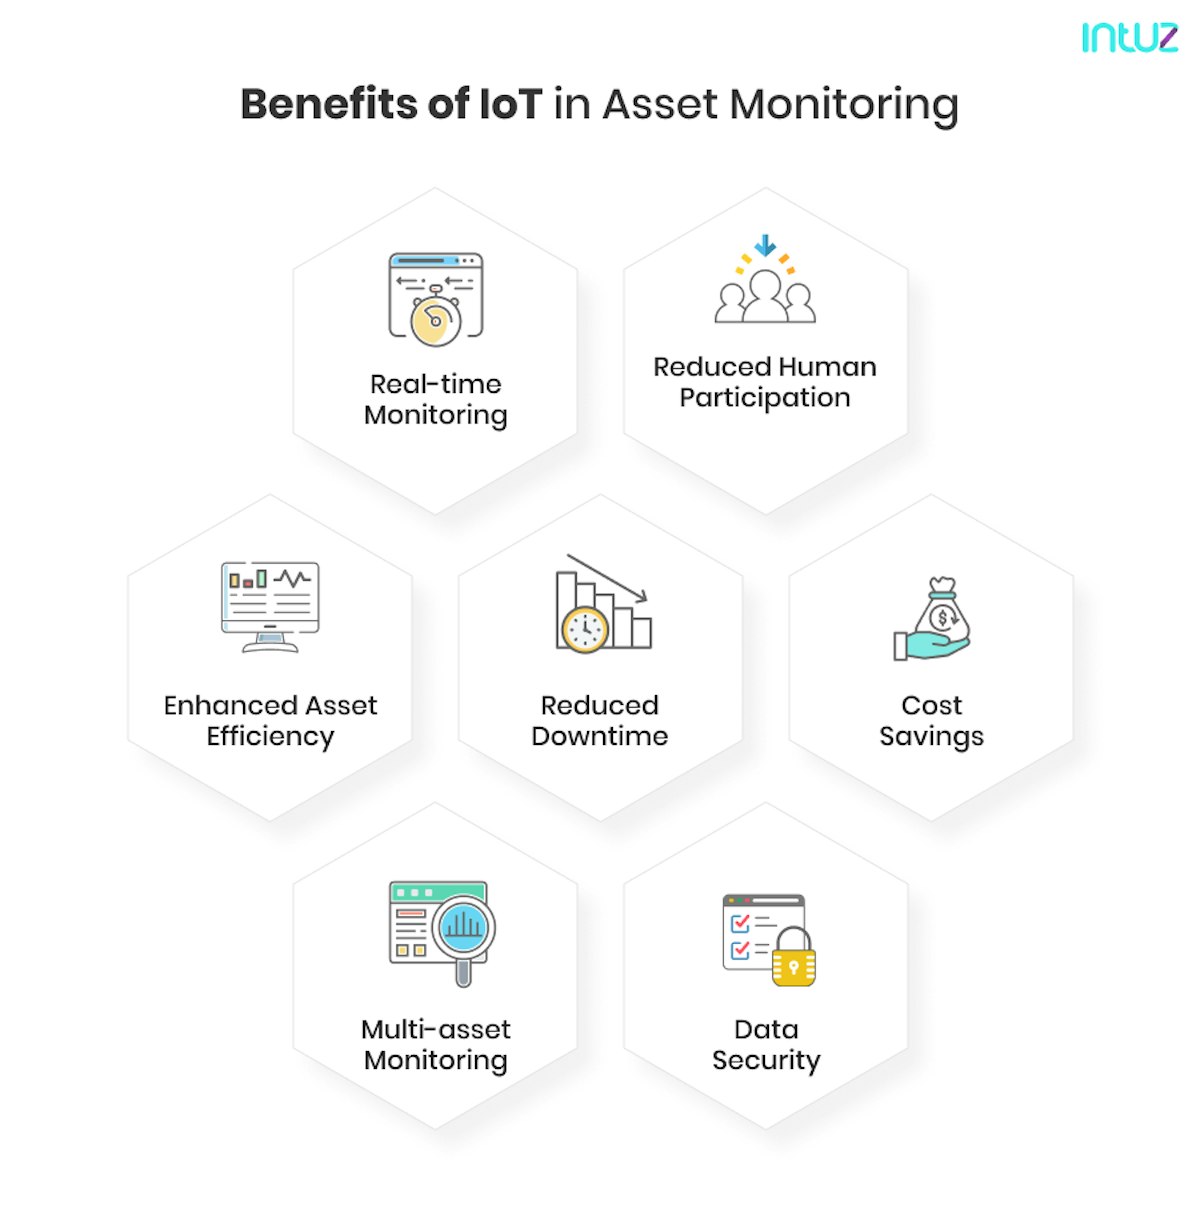 Benefits of IoT in Asset Monitoring